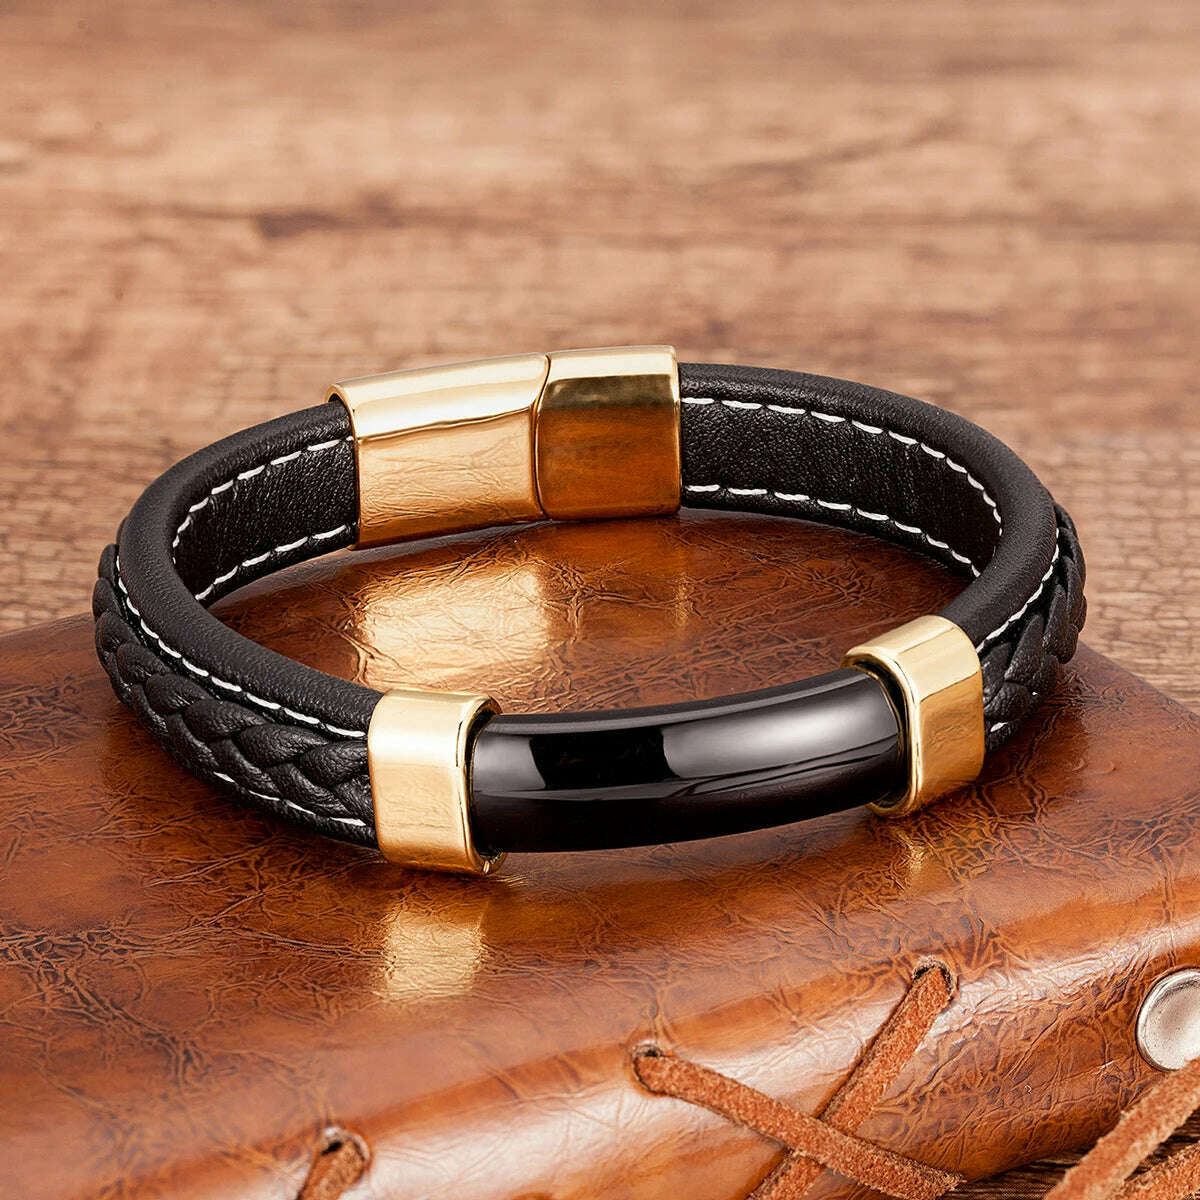 KIMLUD, 100% Natural Stone Mens Bracelet 2021 Luxury Black Genuine Leather Rope Chain Stainless Steel Magnet Clasp Male Jewelry, Black-Agate-Gold / 19cm, KIMLUD Womens Clothes